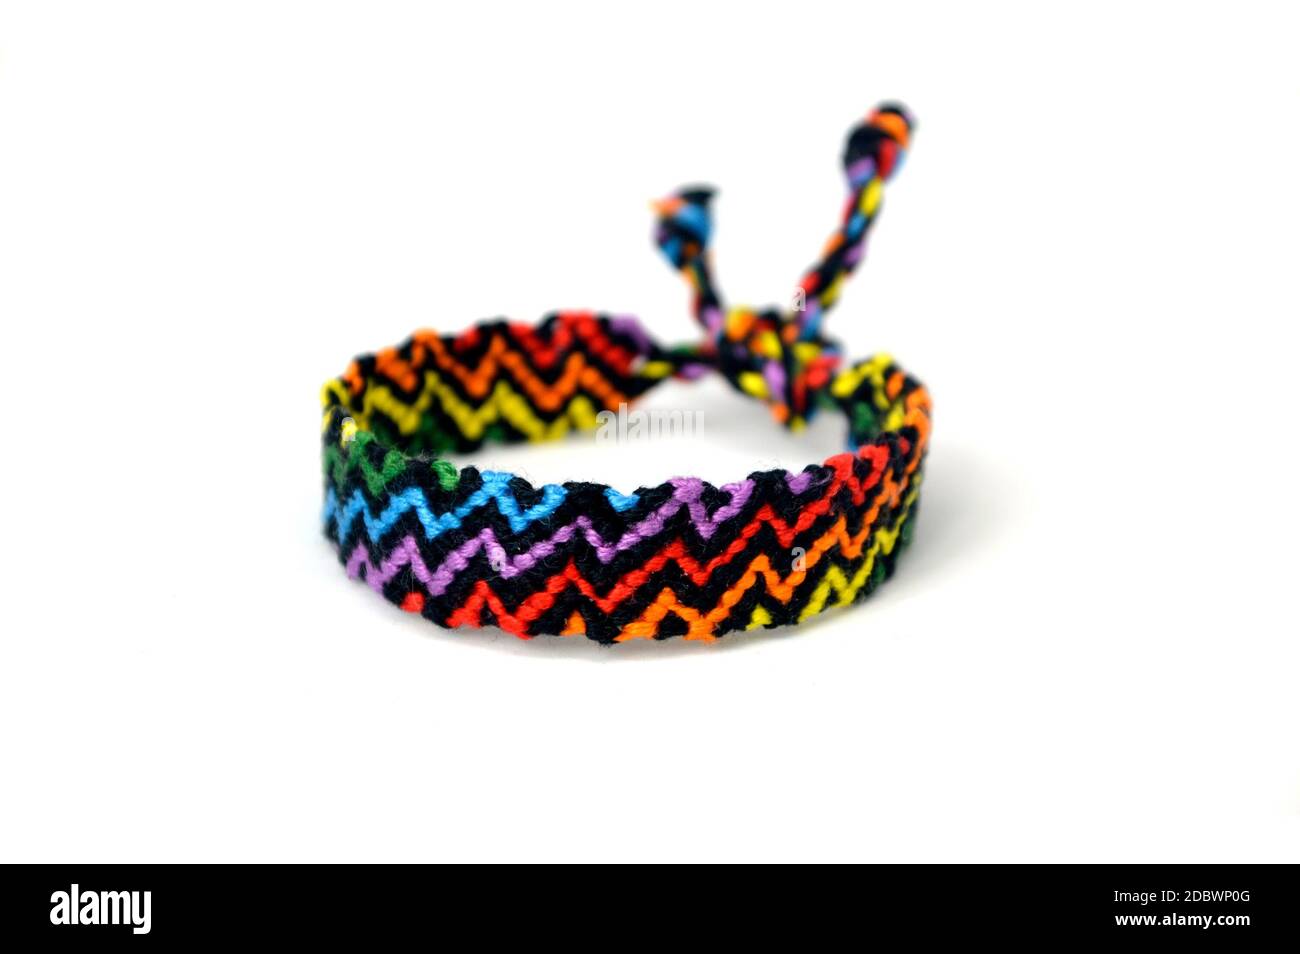 Selective focus of tied woven friendship bracelet with bright colorful ...